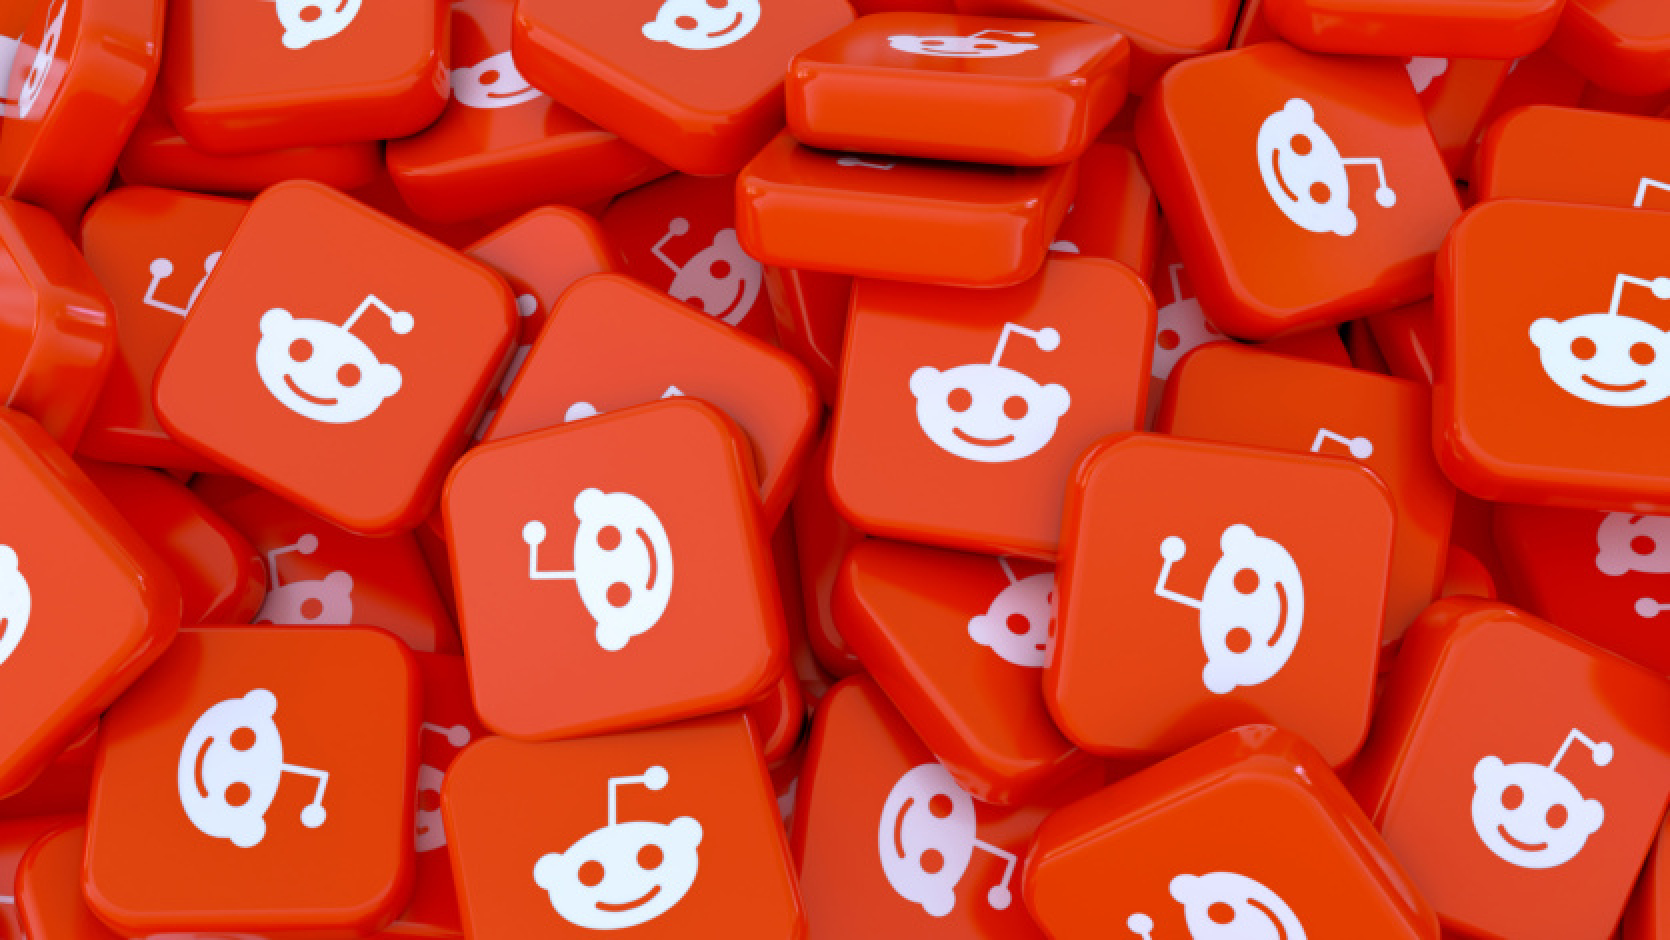 Reddit plans to IPO and invites investment from active users